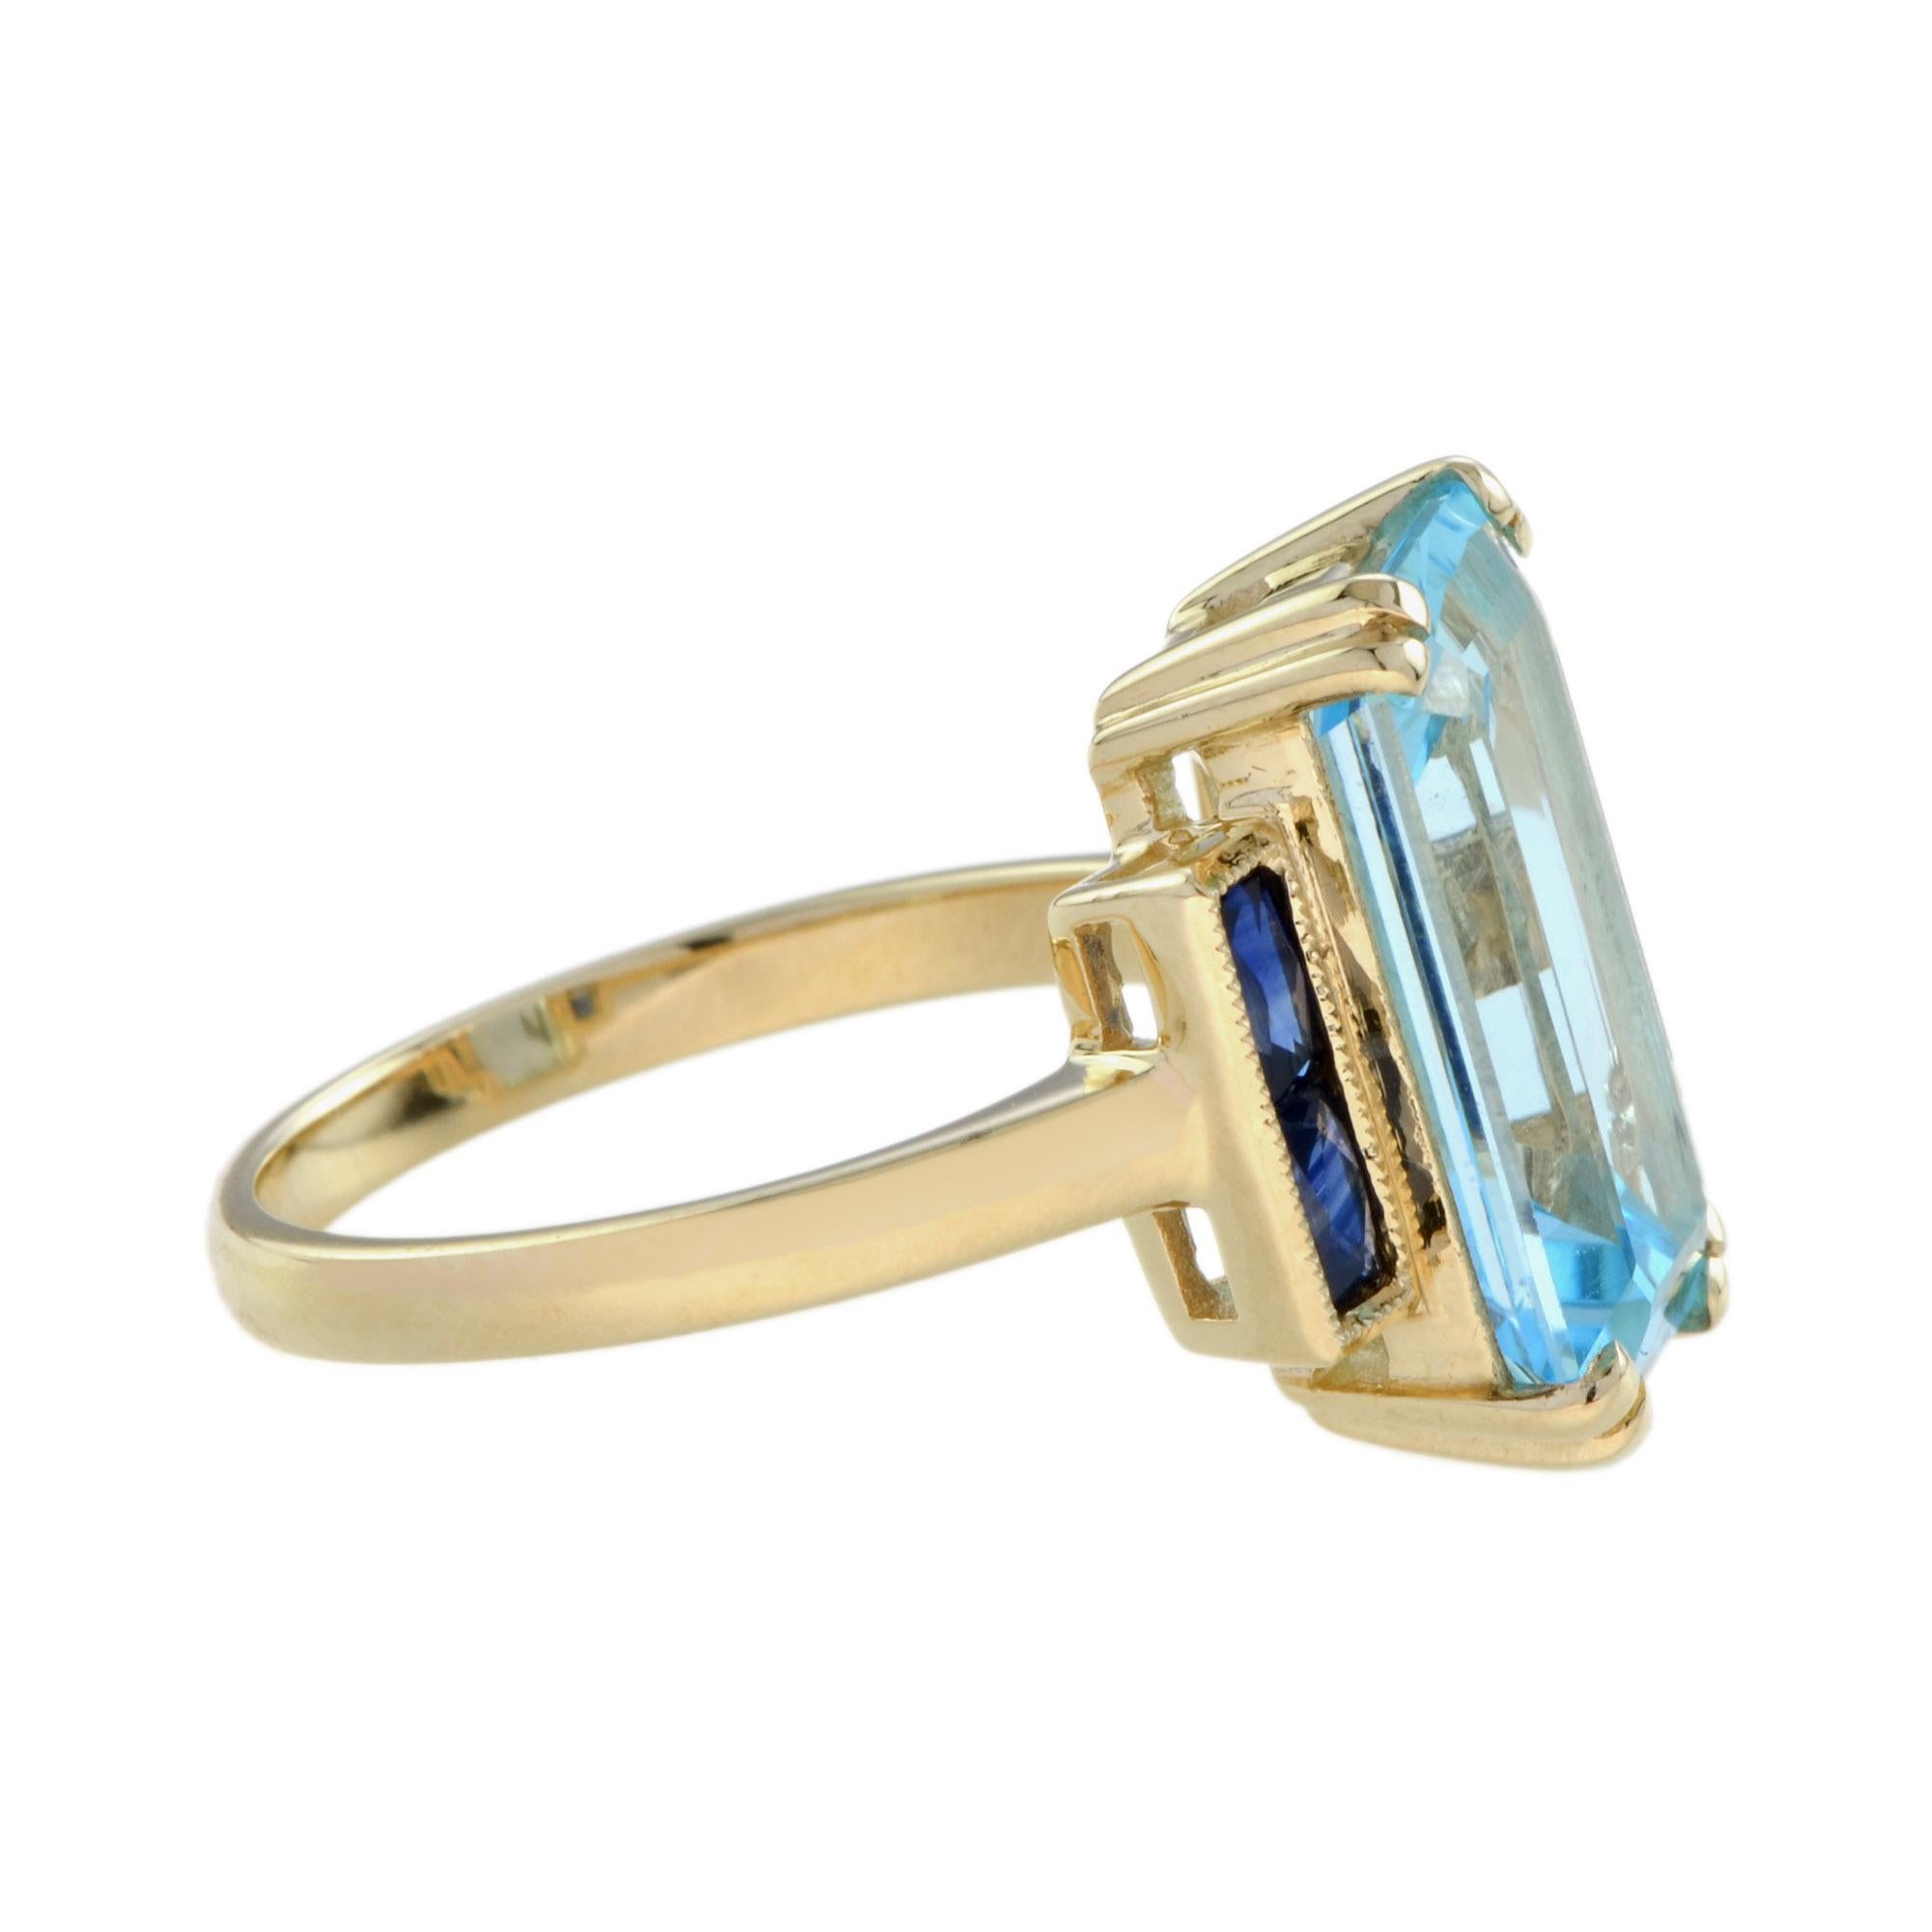 For Sale:  Emerald Cut Blue Topaz and Sapphire Art Deco Style Solitaire Ring in 14k Gold 5